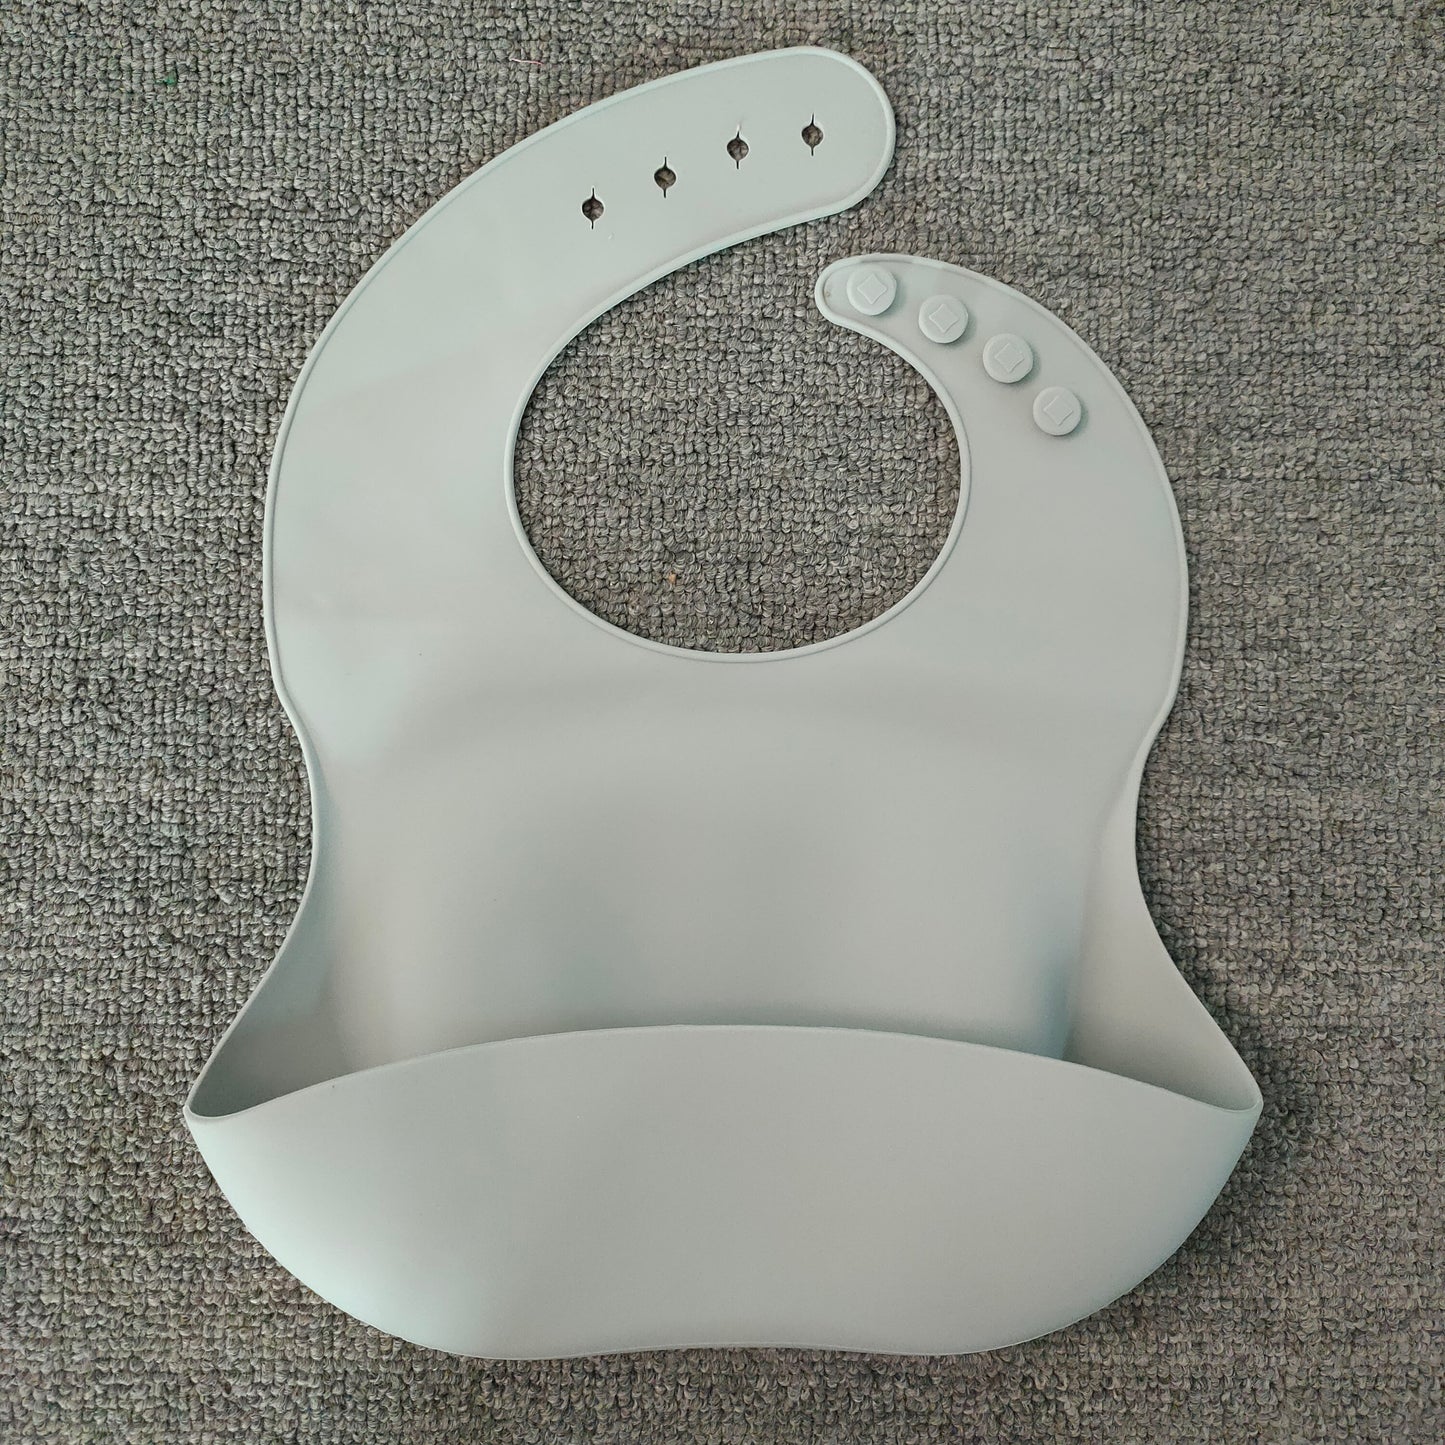 Soft Waterproof Silicone Baby Bibs with Food Catcher